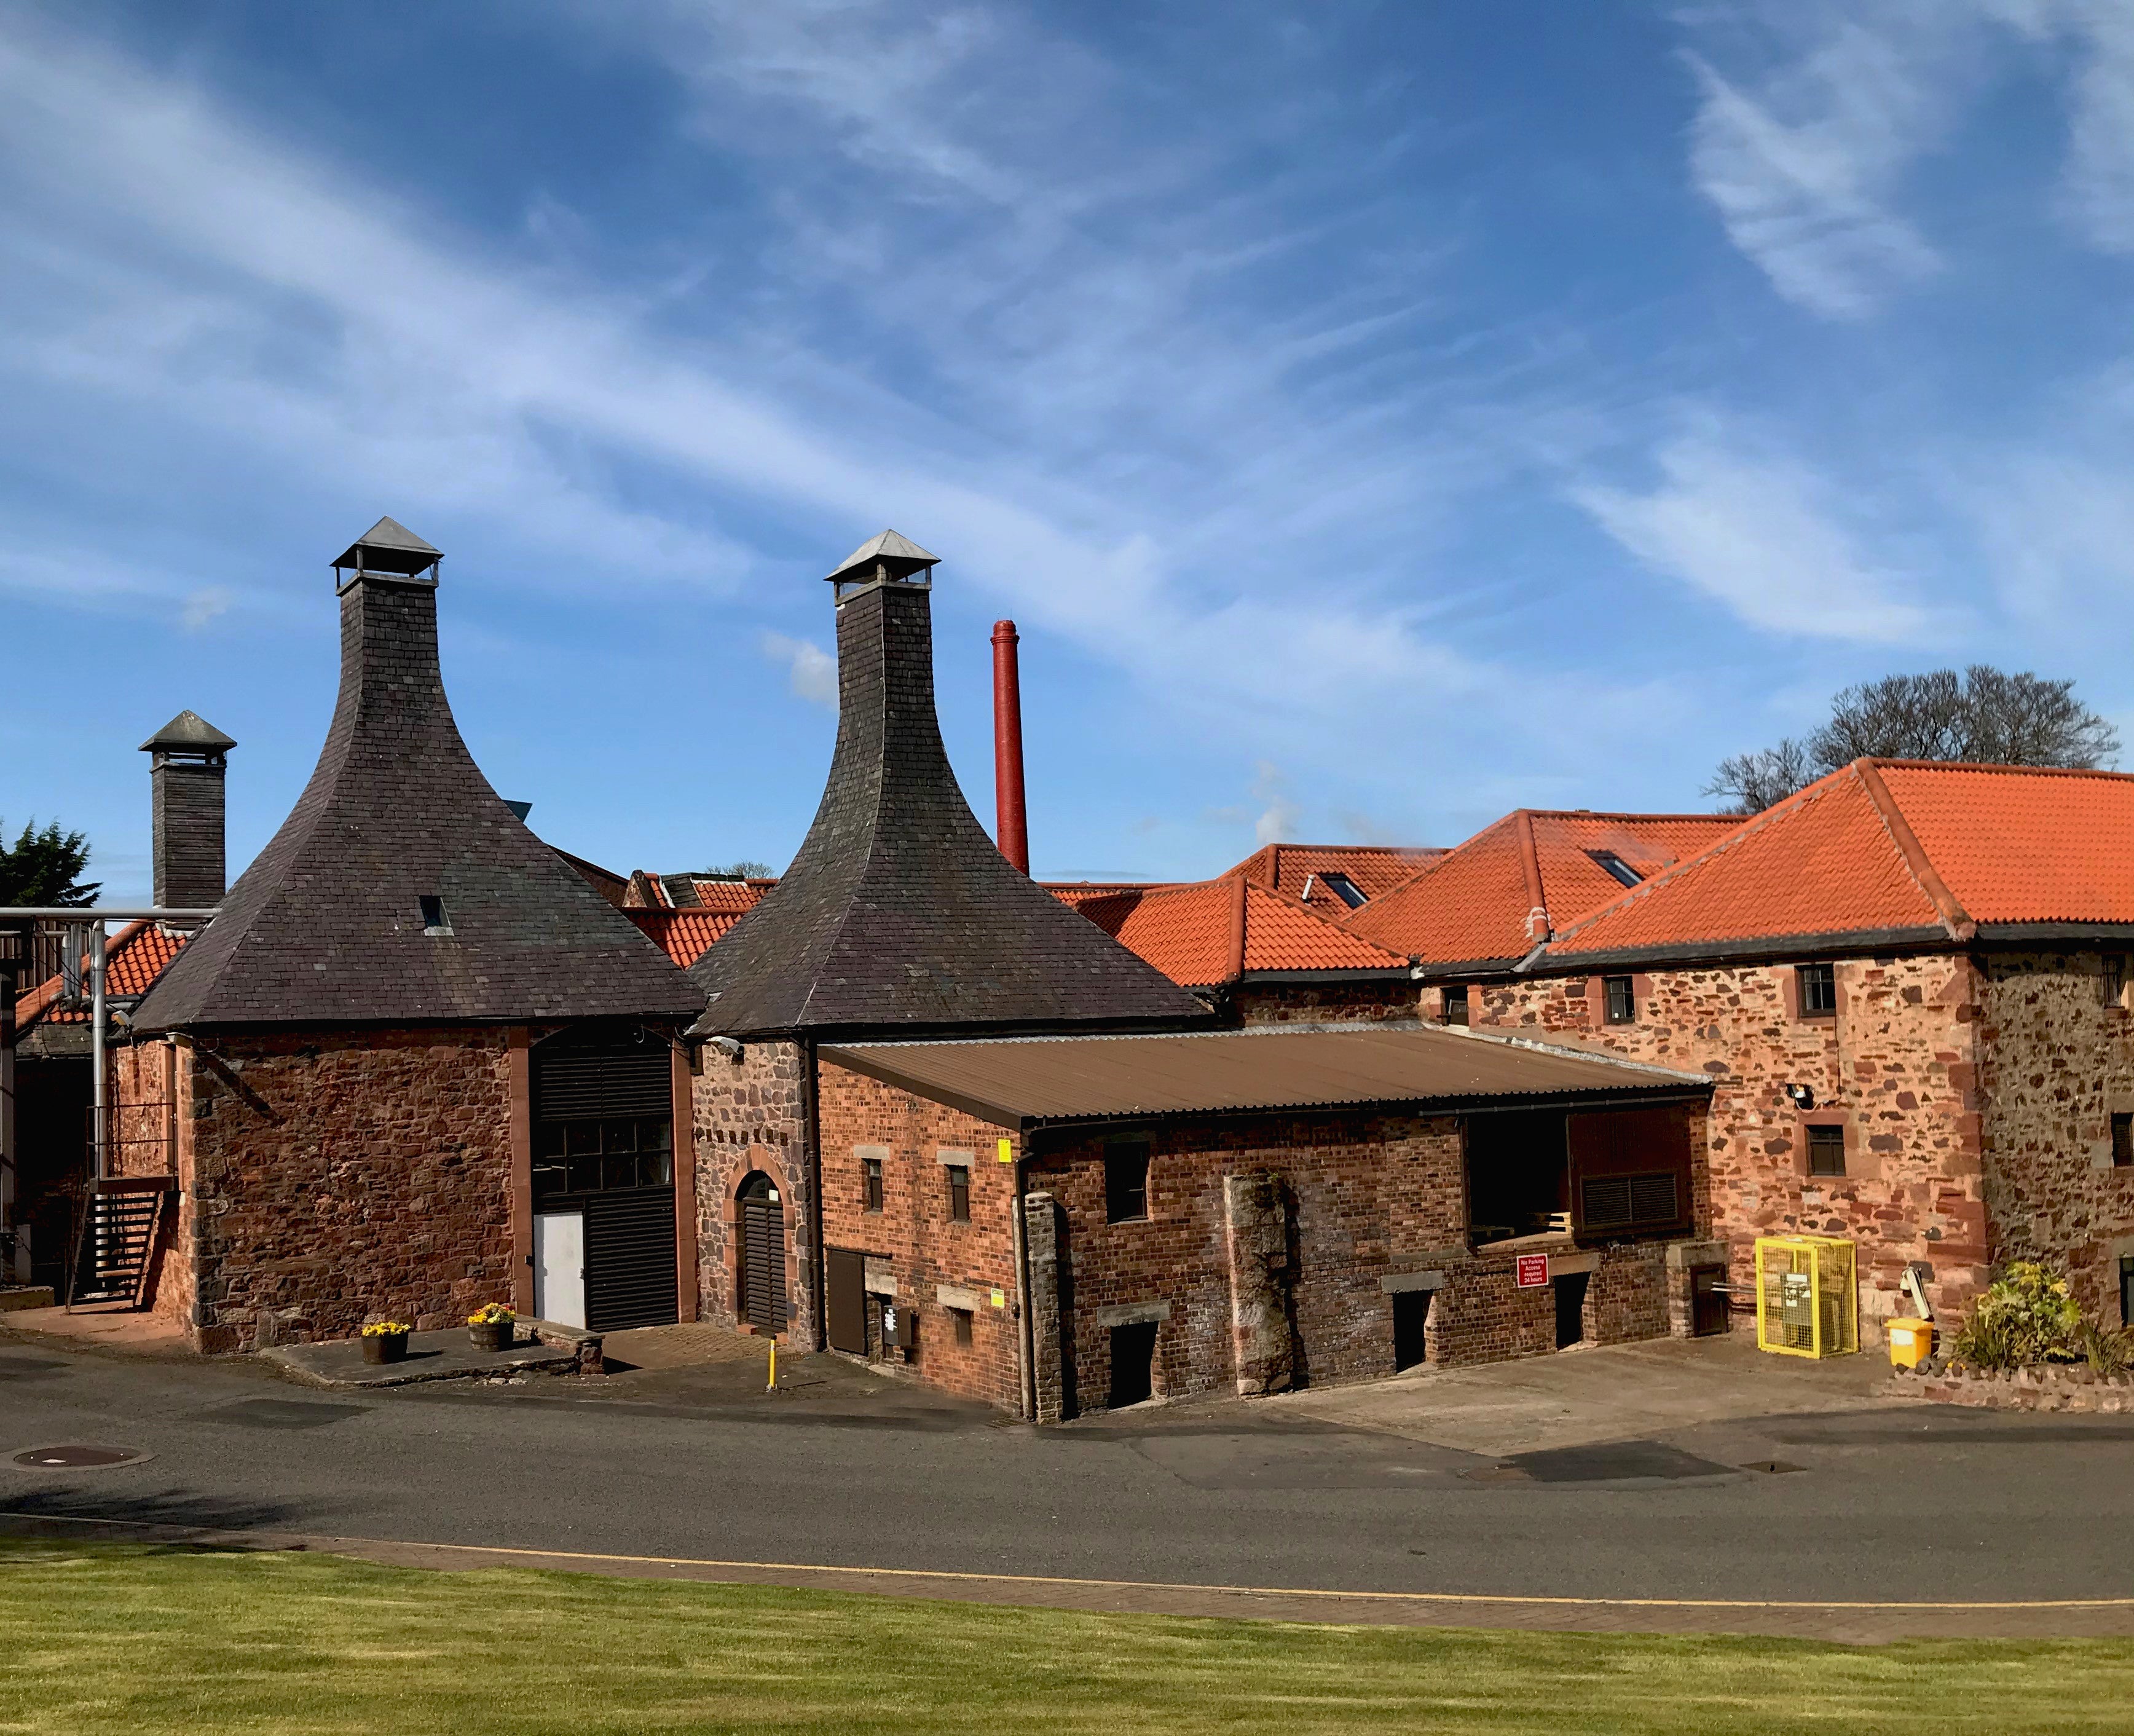 Belhaven brewery building and outside view